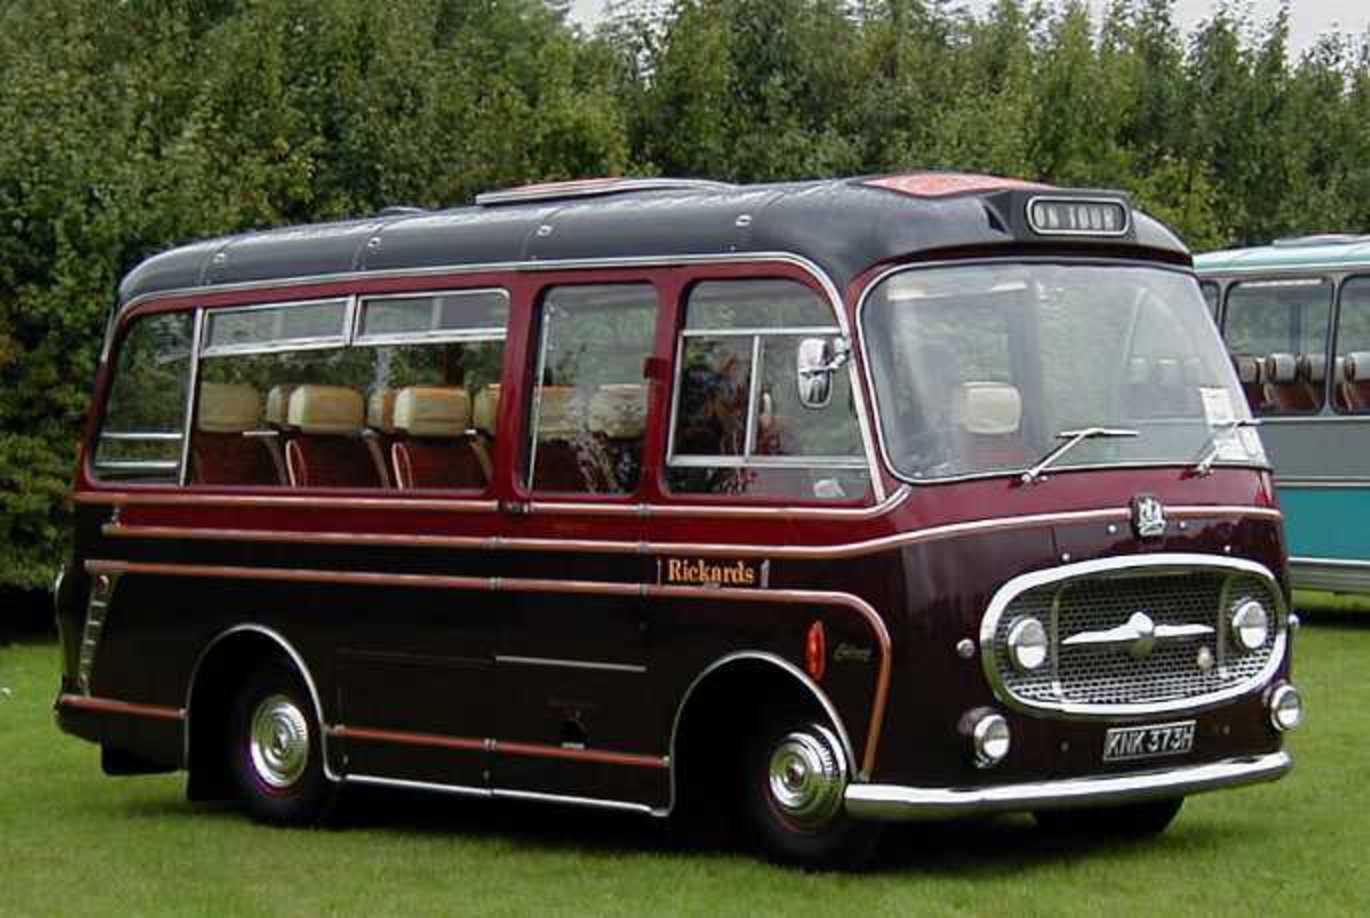 The SHOWBUS Photo Gallery - Rickards